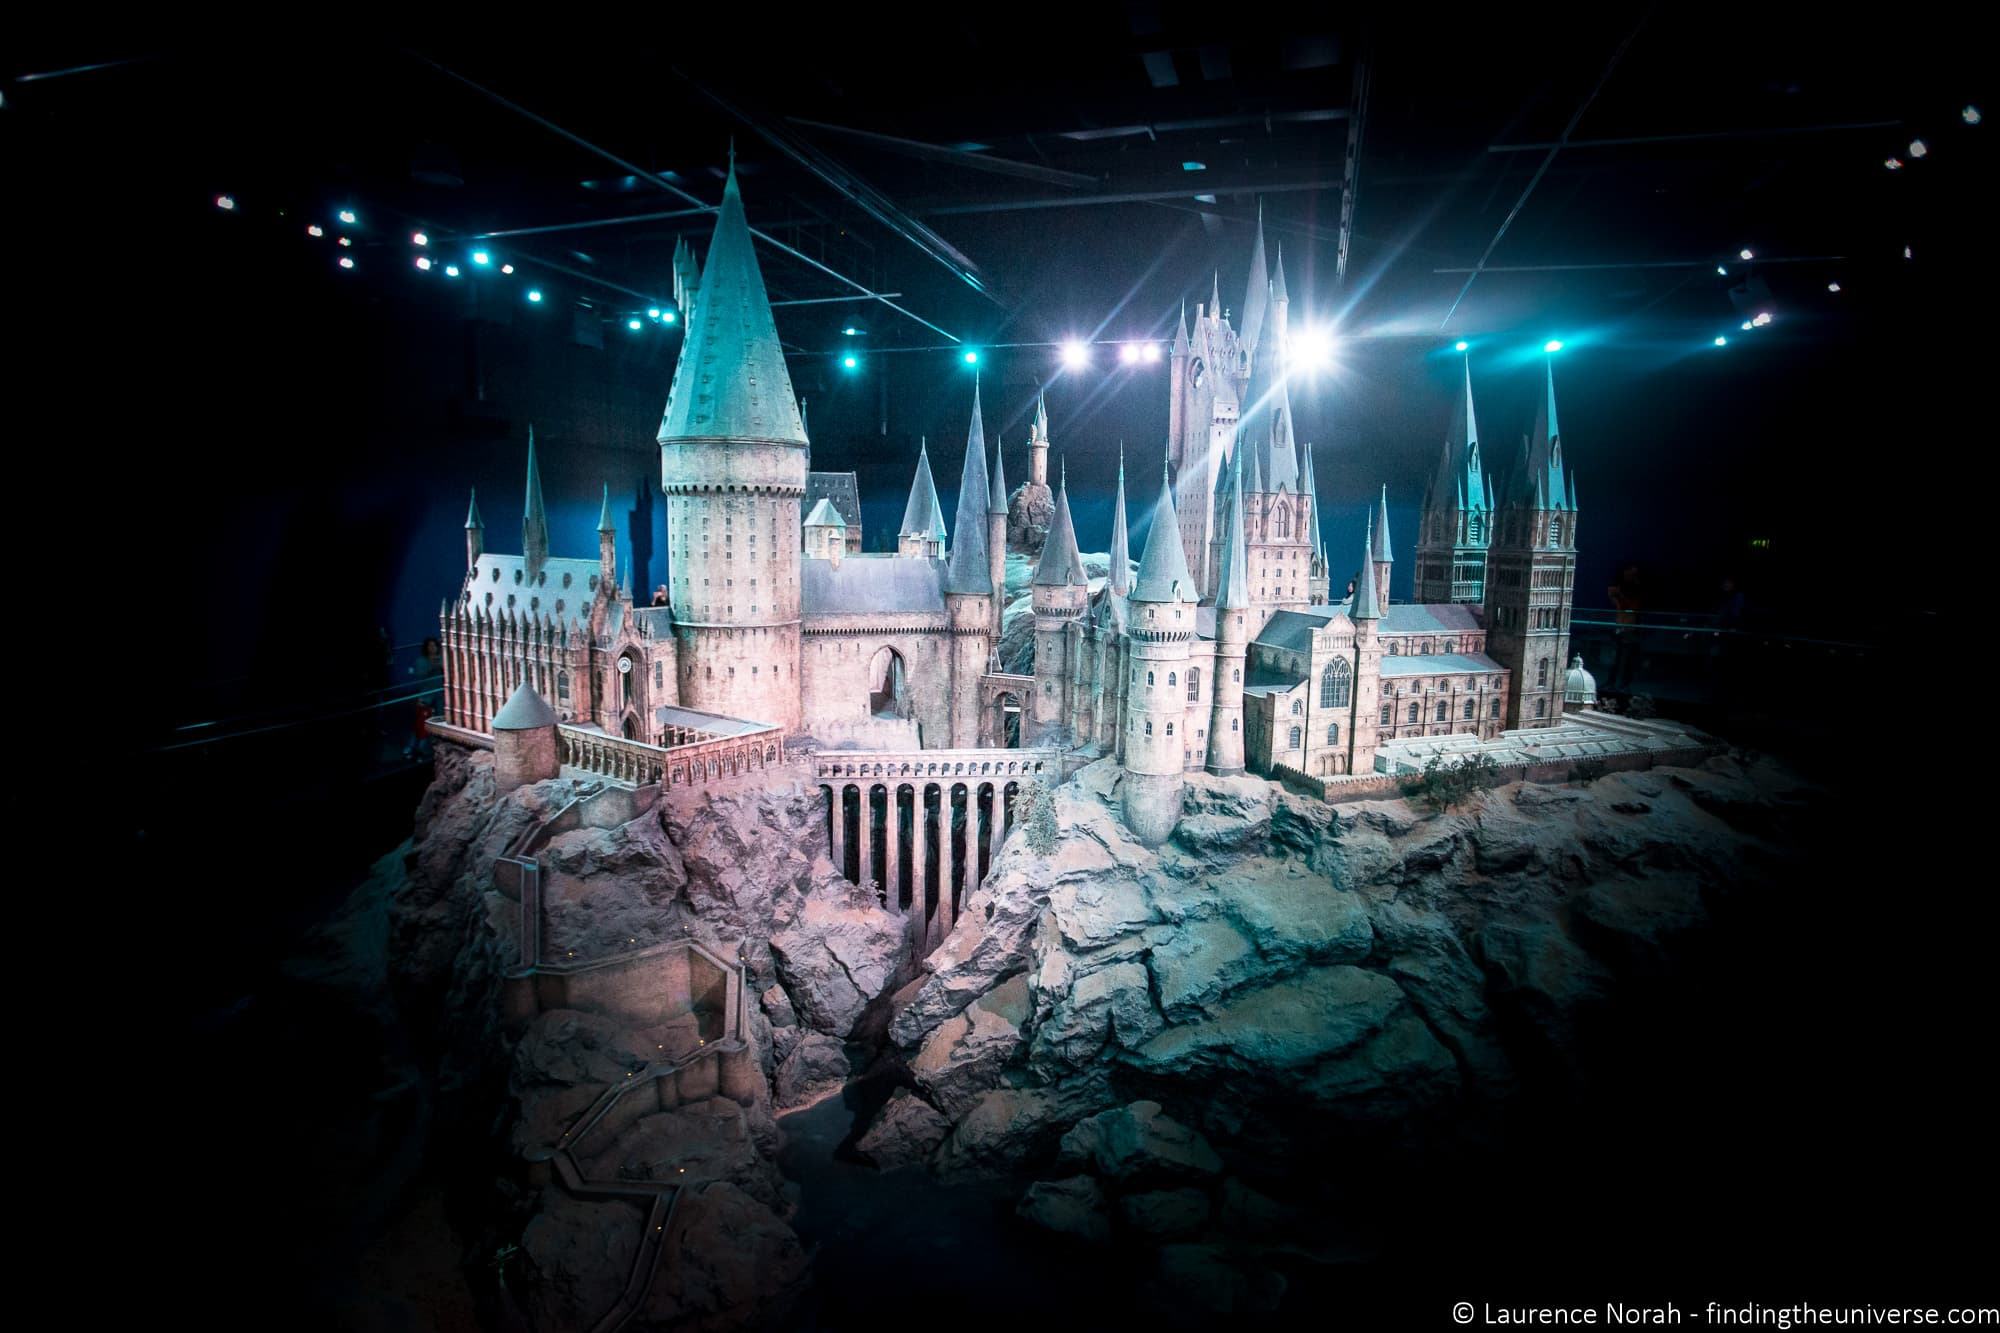 #Top 9 Things to See at Harry Potter Studio London Tour